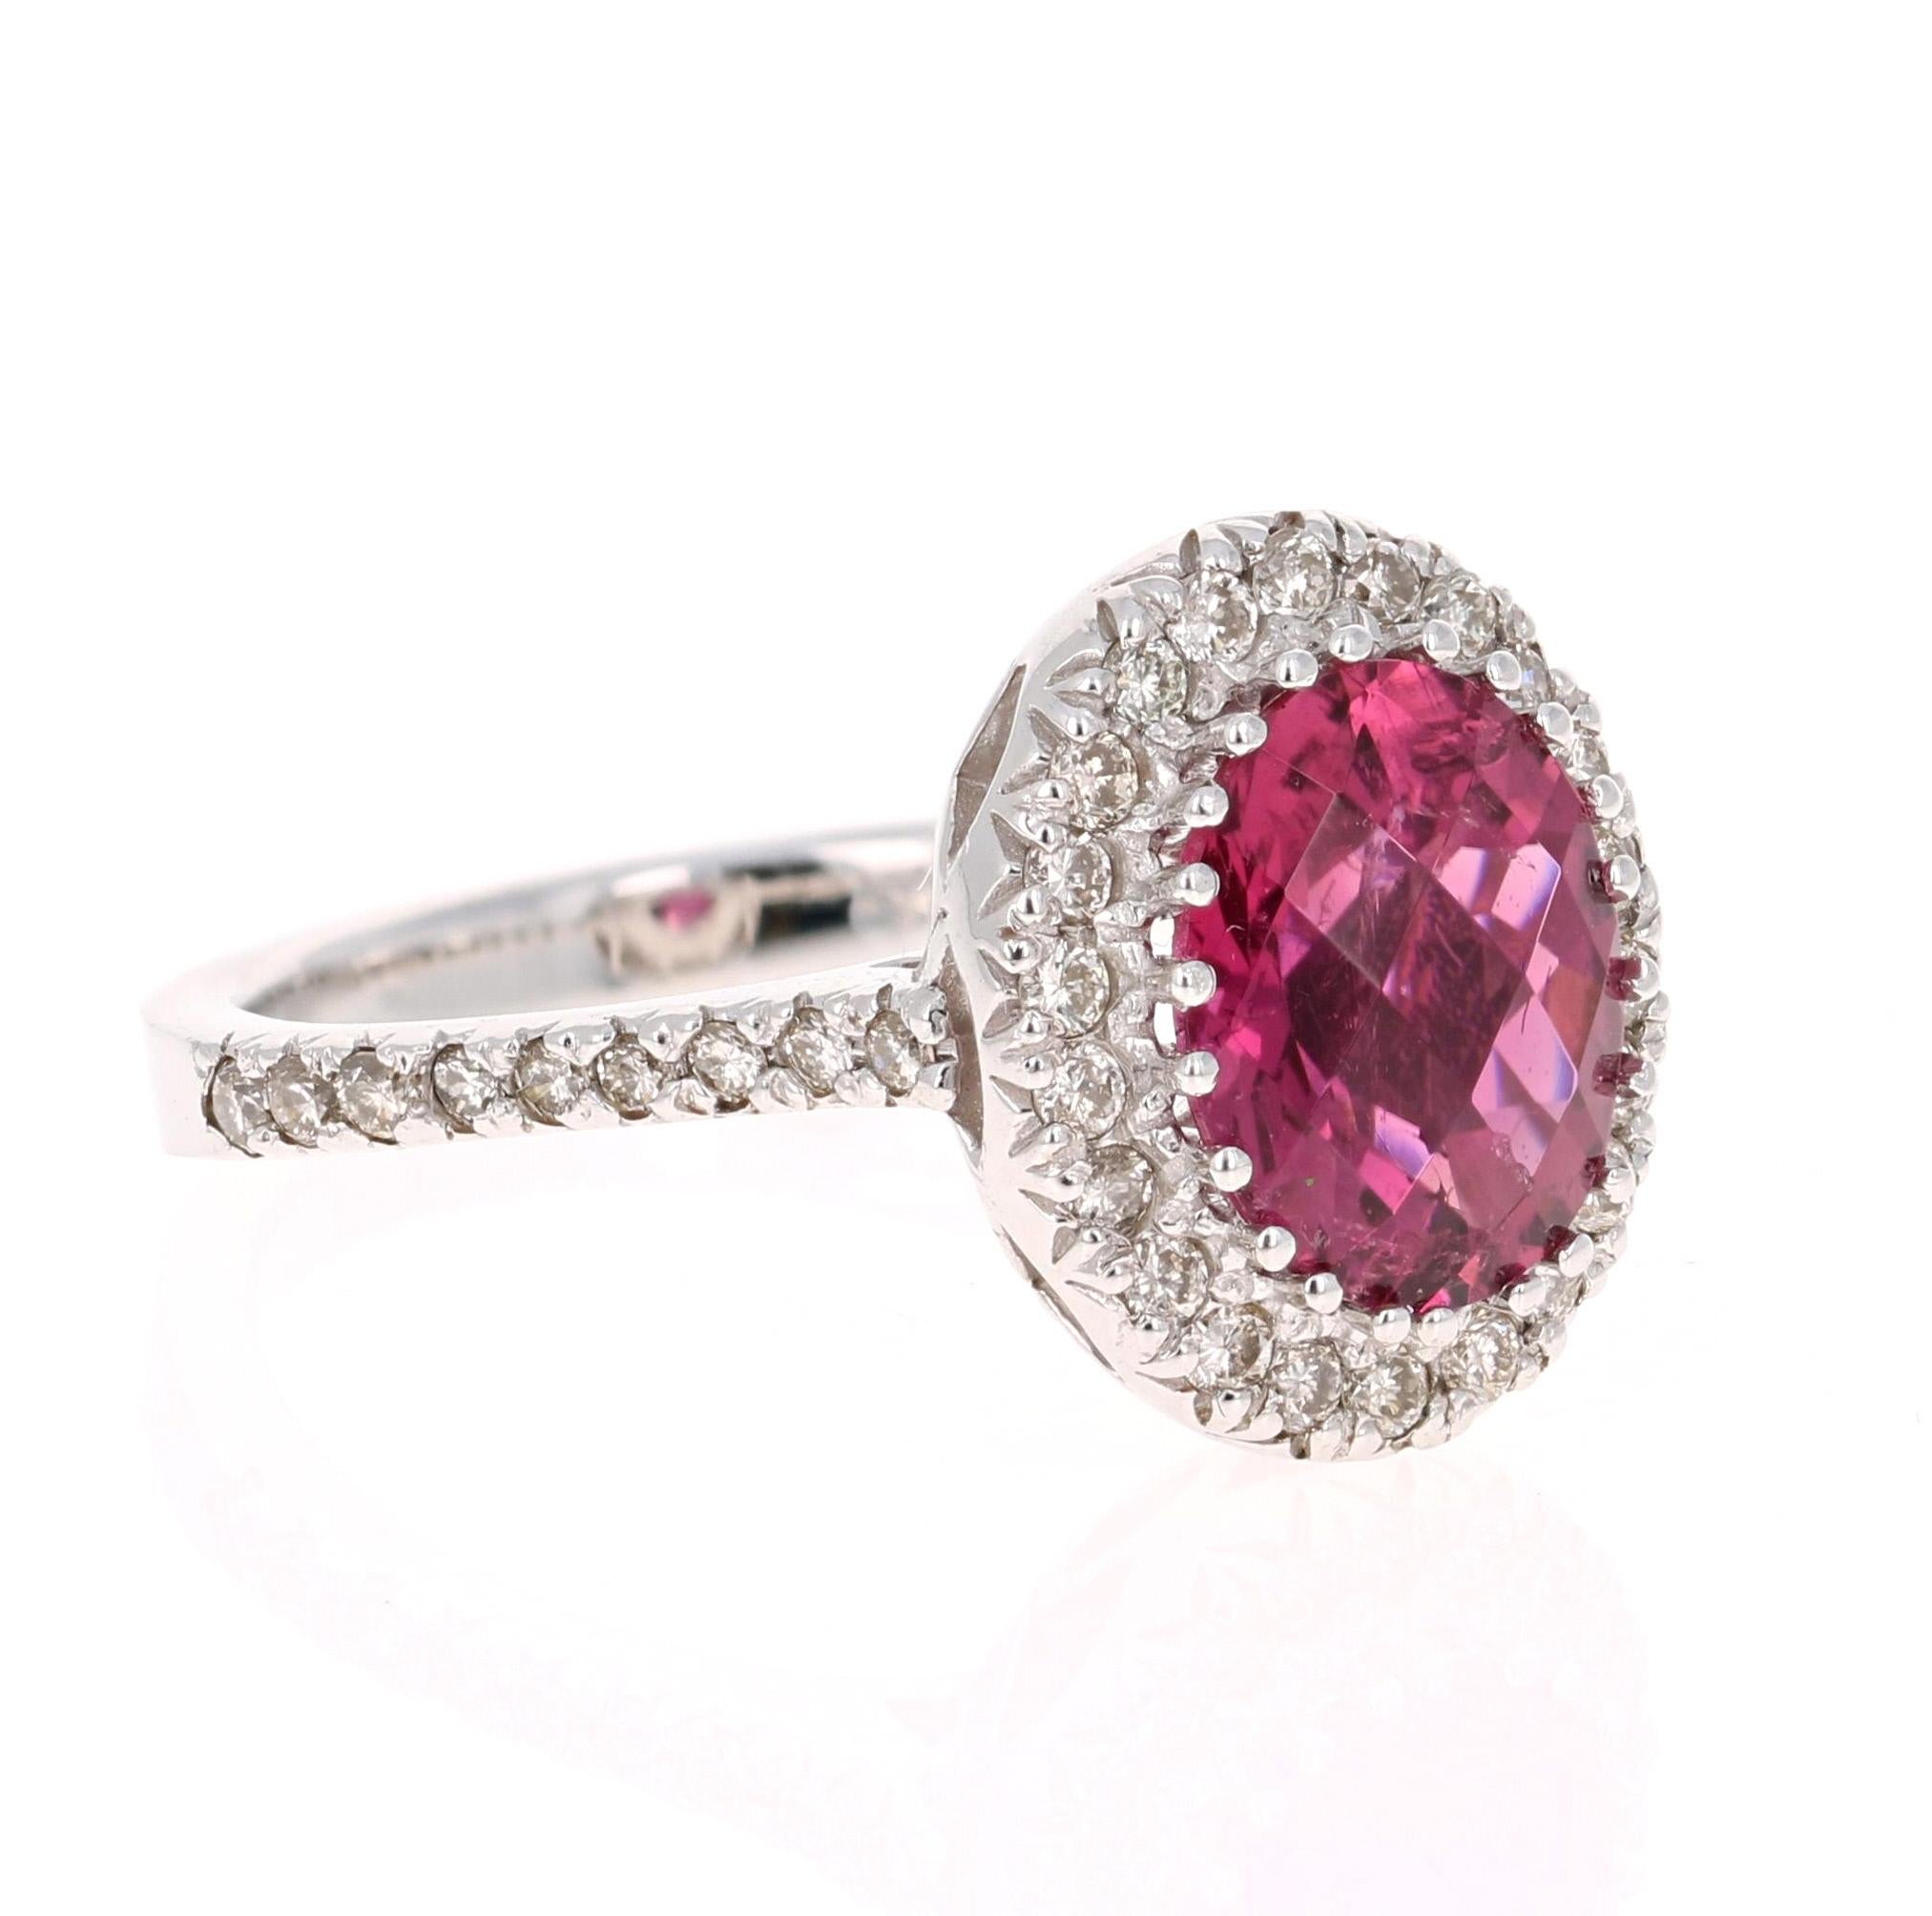 Wow! Beautiful and Radiant Pink Tourmaline Ring!

This ring has an Oval Checkered Cut Pink Tourmaline that weighs 3.49 Carats. Floating around the tourmaline are 40 Round Cut Diamonds weighing 0.50 Carats. 
The total carat weight of the ring is 3.99